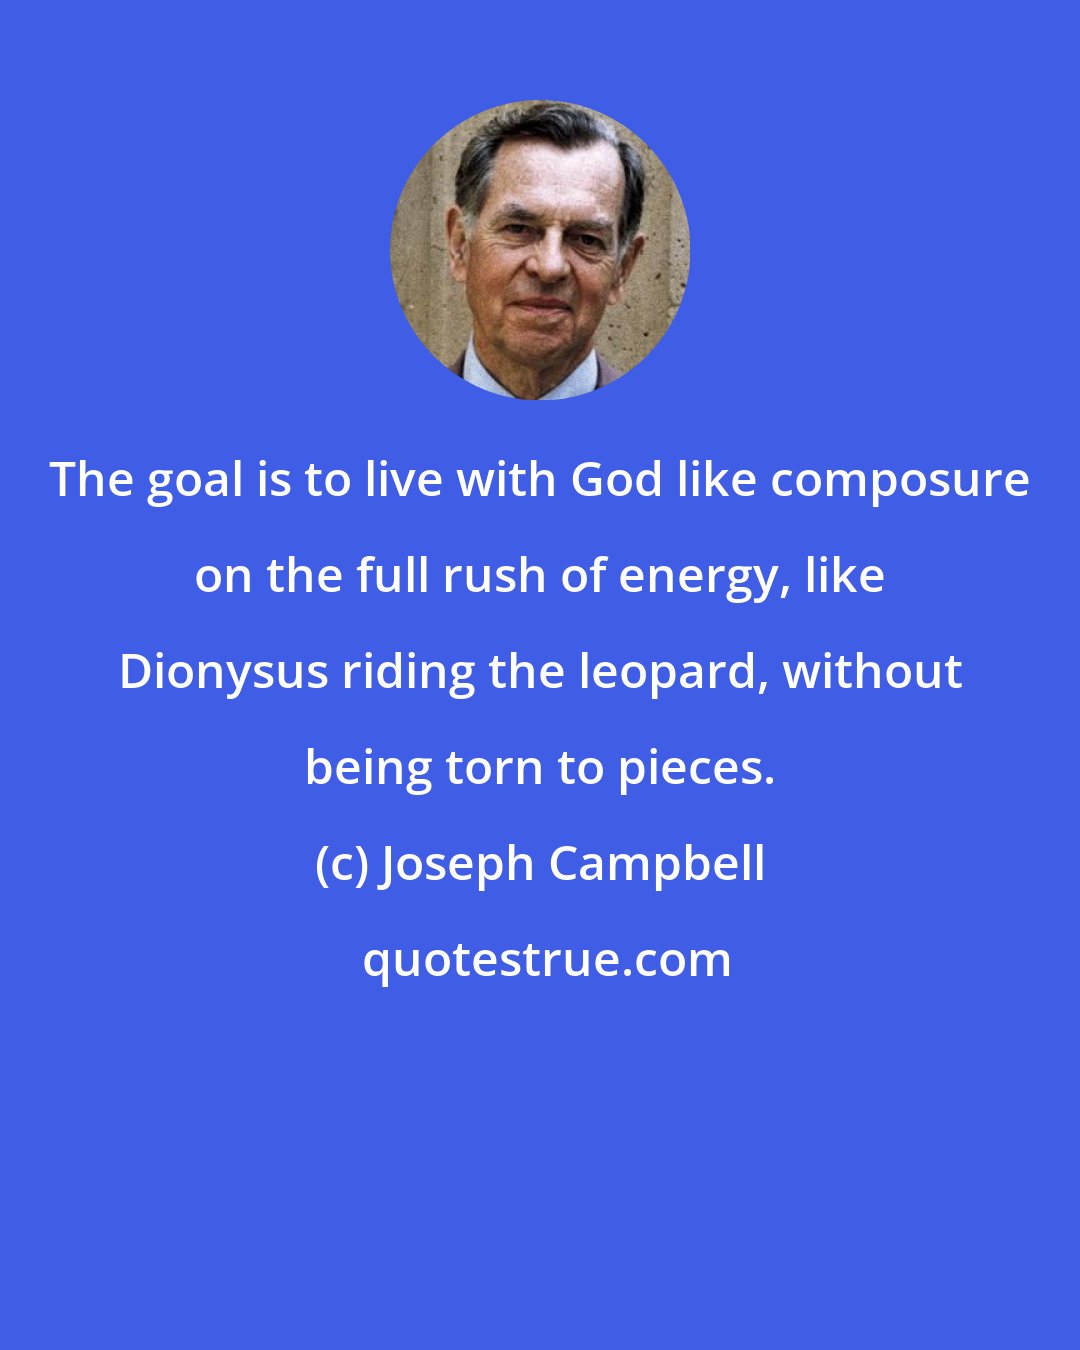 Joseph Campbell: The goal is to live with God like composure on the full rush of energy, like Dionysus riding the leopard, without being torn to pieces.